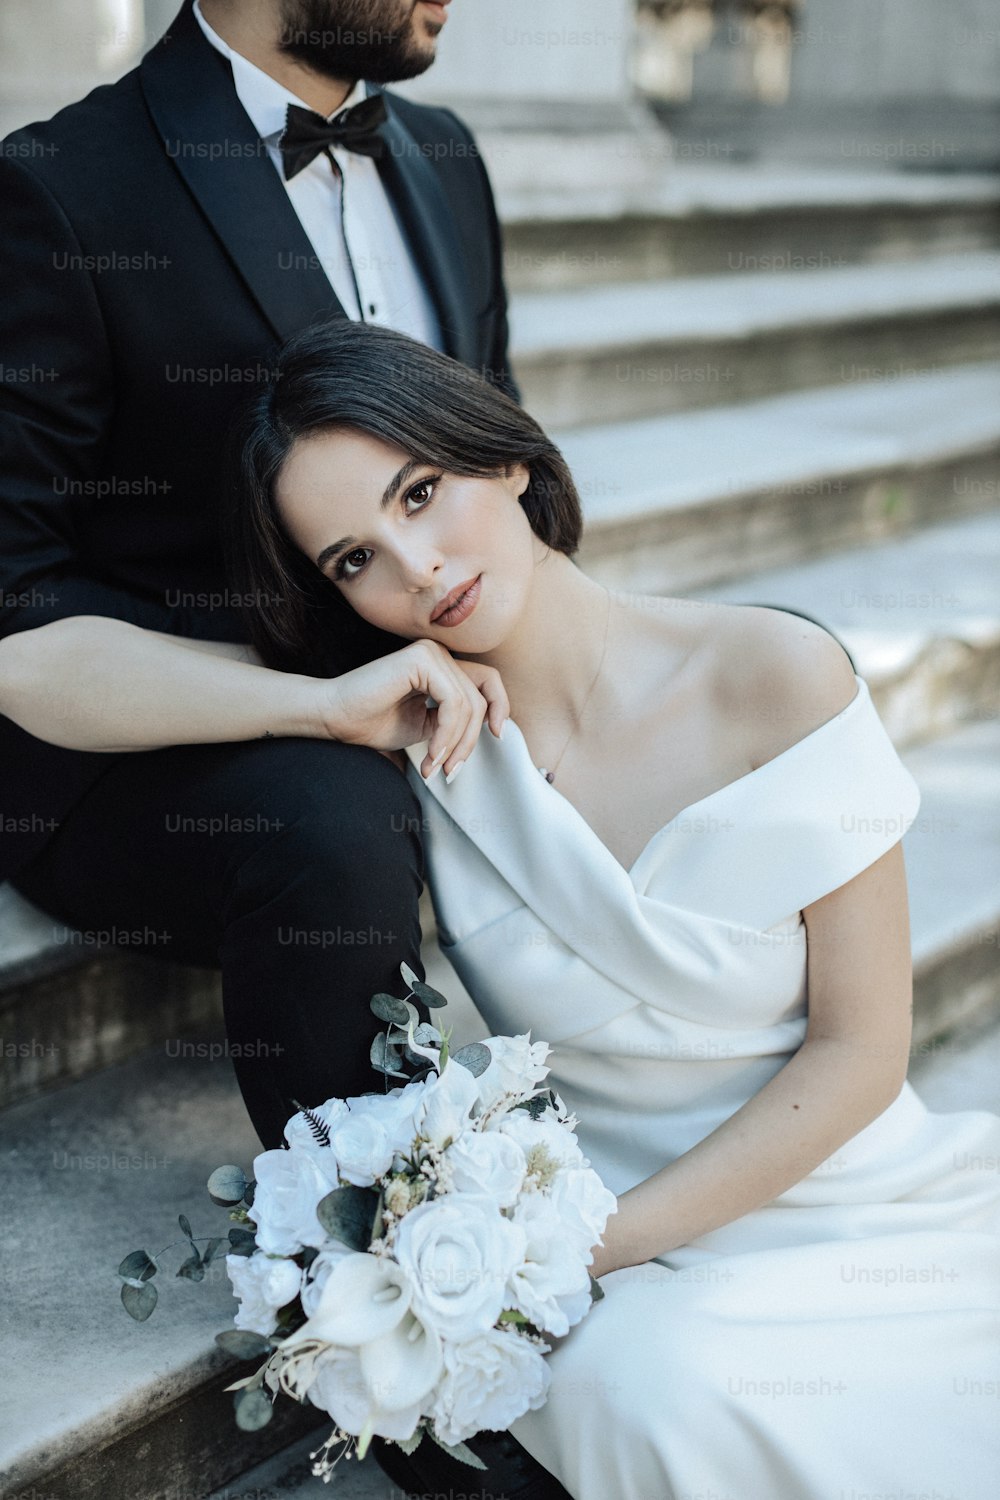 a bride and groom sitting on the steps of a building